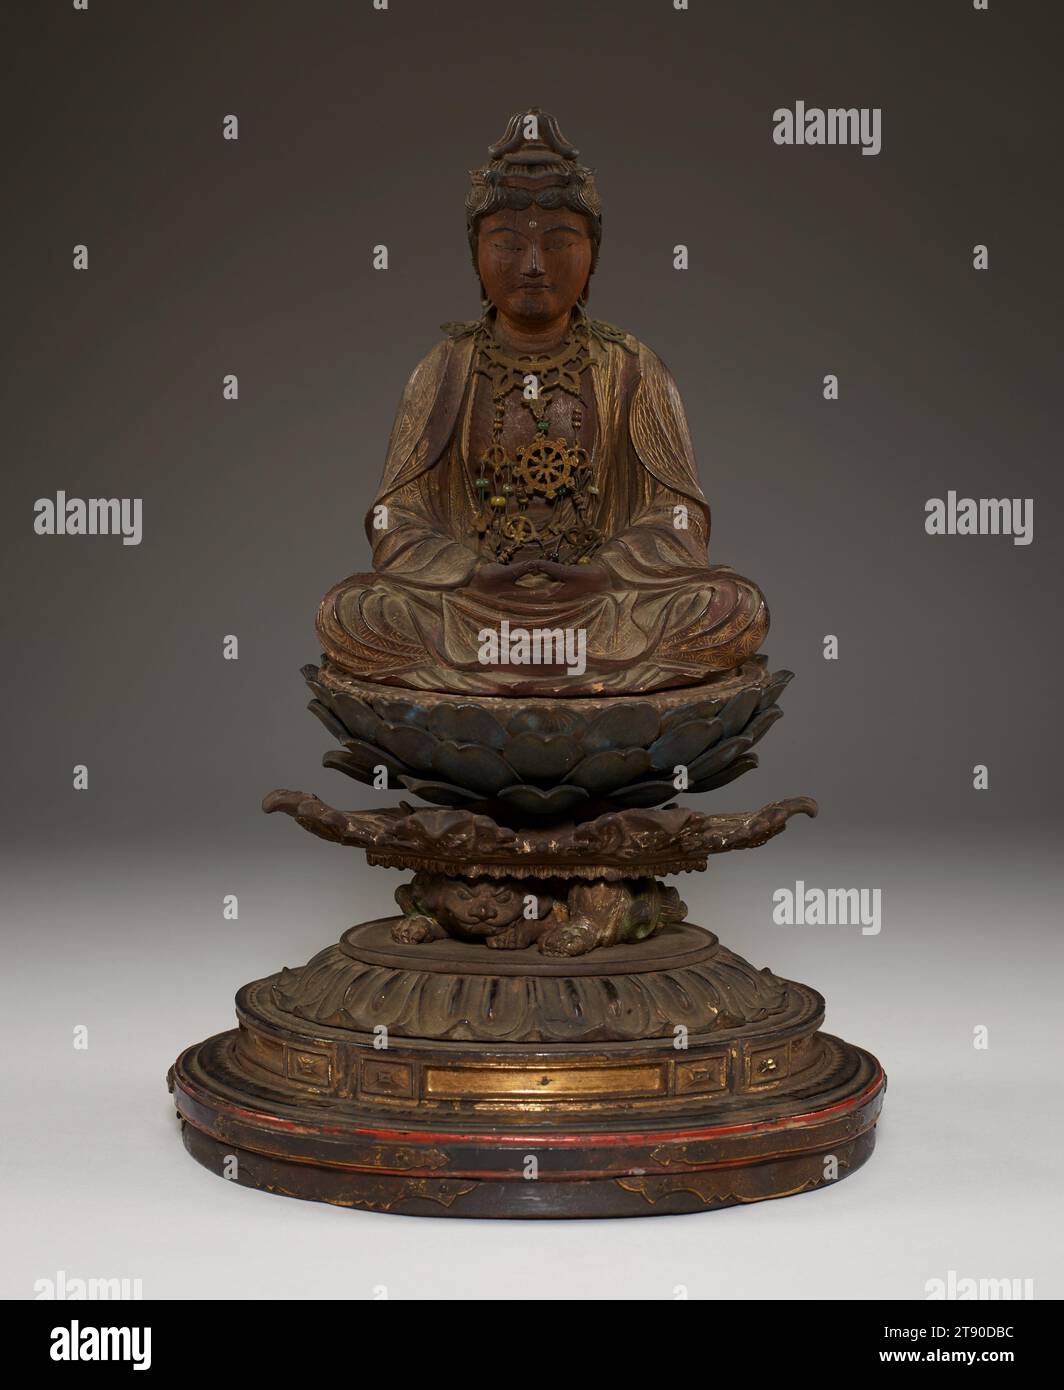 Miroku, the Bodhisattva of the Future, second half 13th century, Unknown Japanese, 11 1/2 × 7 1/2 × 6 5/8 in. (29.21 × 19.05 × 16.83 cm), Wood with metal, cut gold leaf (kirikane), polychrome, and inlaid crystal eyes, Japan, 13th century, Miroku Bosatsu is seated on a lotus throne perched on a struggling demon, holding a pagoda in his upturned palms. The statue retains its original metal raiments, as well as the gold leaf decoration on the draped robes. The figure’s princely attire indicates that Miroku is being depicted in his incarnation as a bodhisattva, an enlightened being Stock Photo